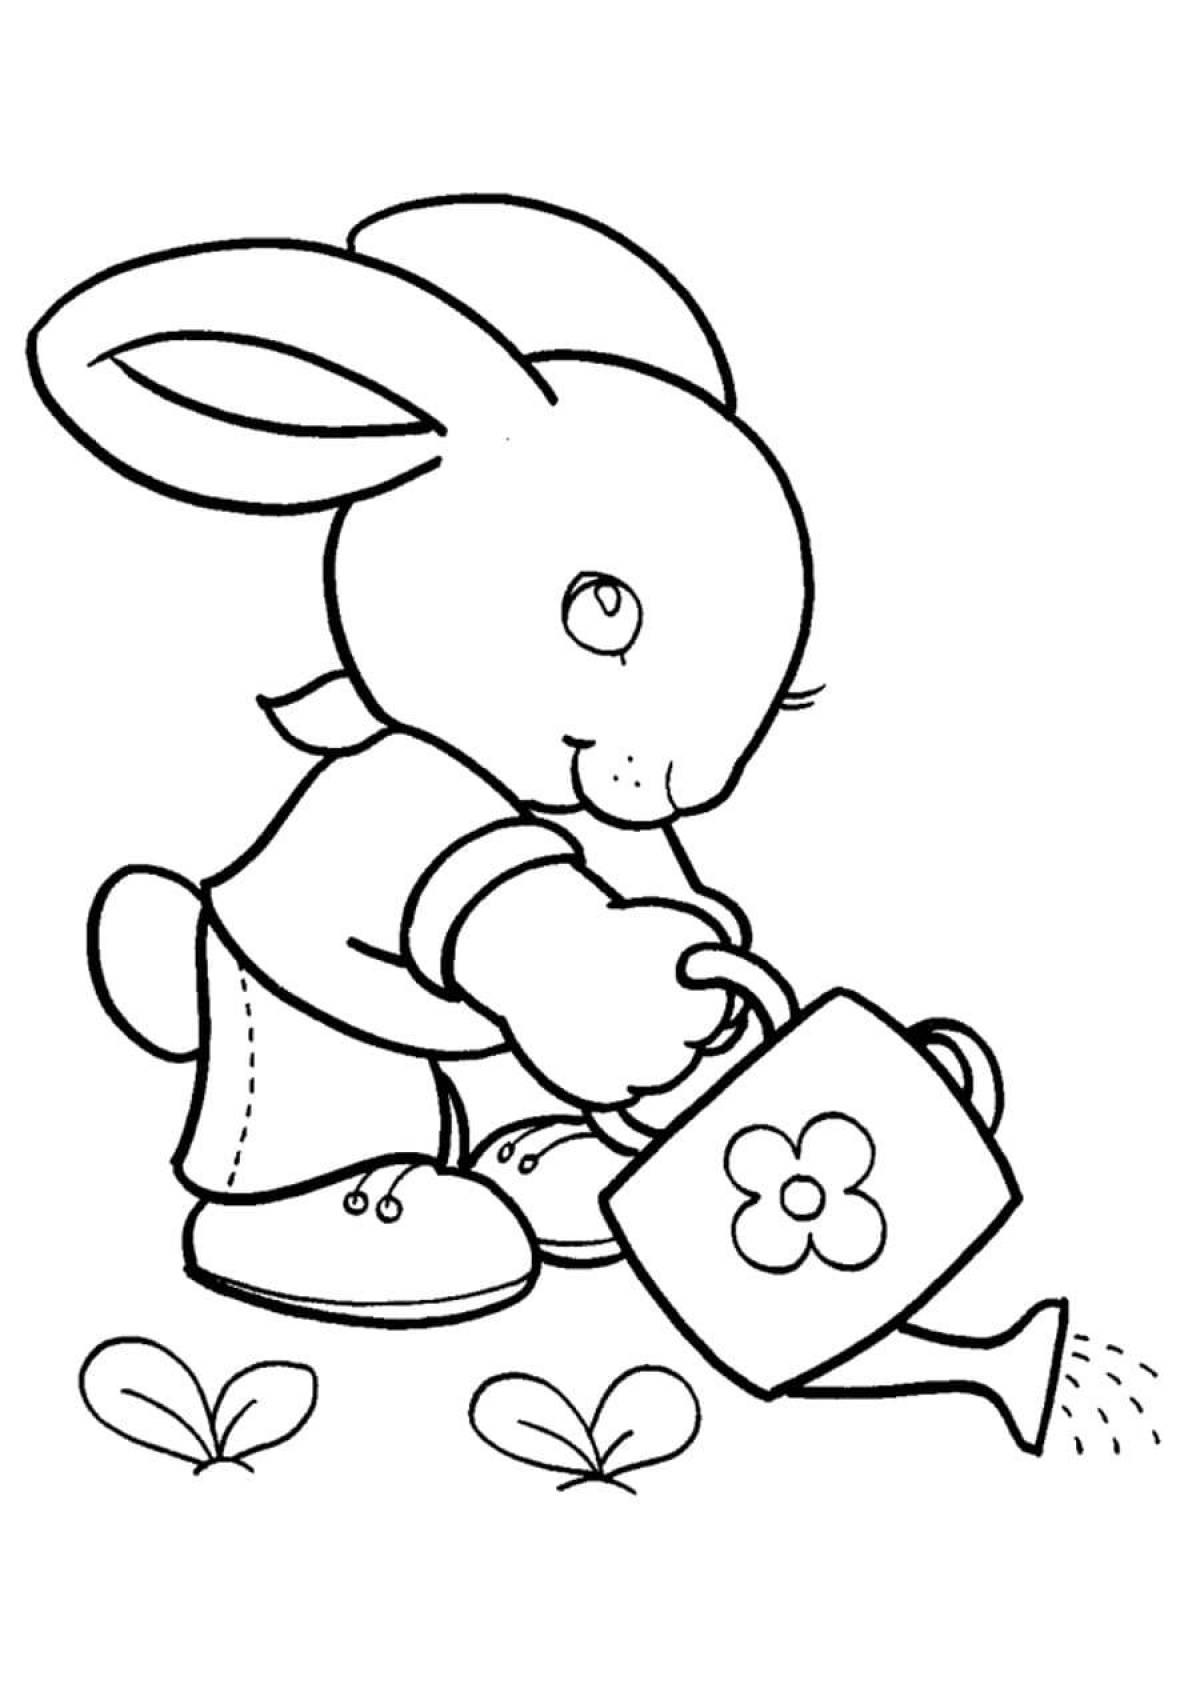 Fairy tale rabbit coloring book for children 3-4 years old